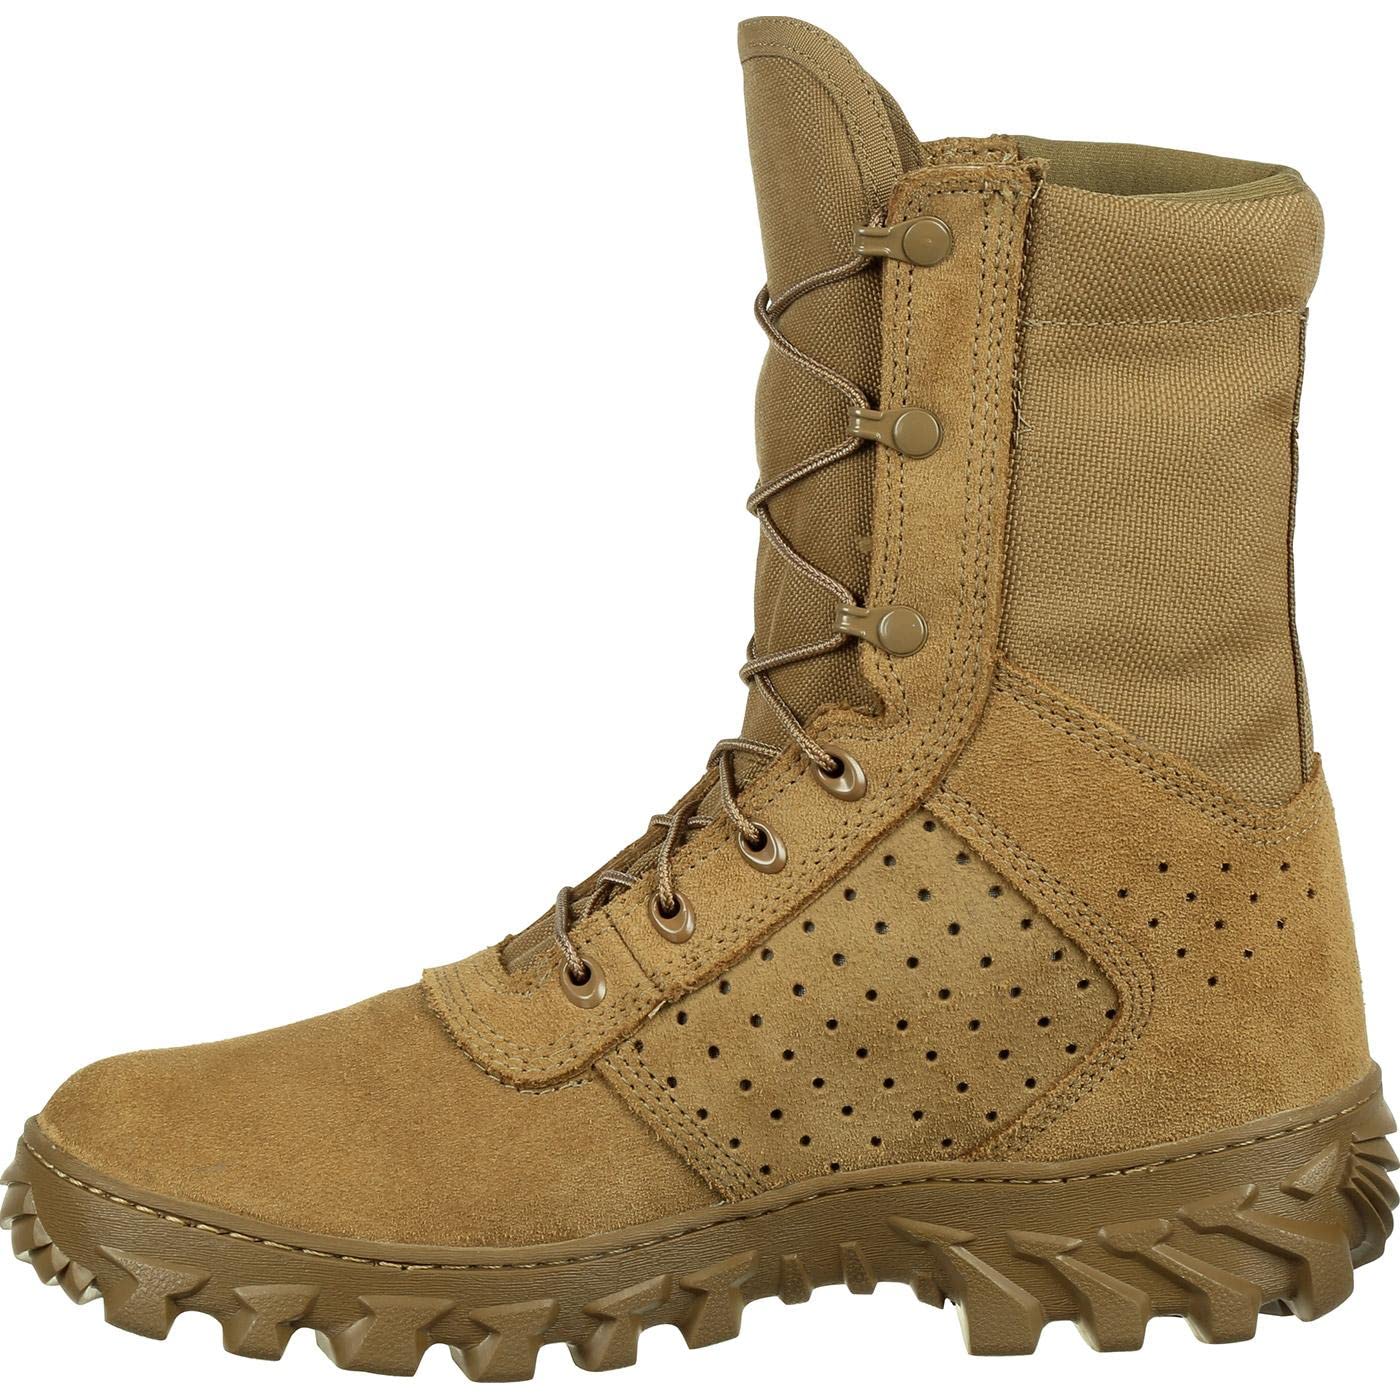 ROCKY S2V Enhanced Jungle Puncture Resistant Boot Size 15(M) Coyote Brown